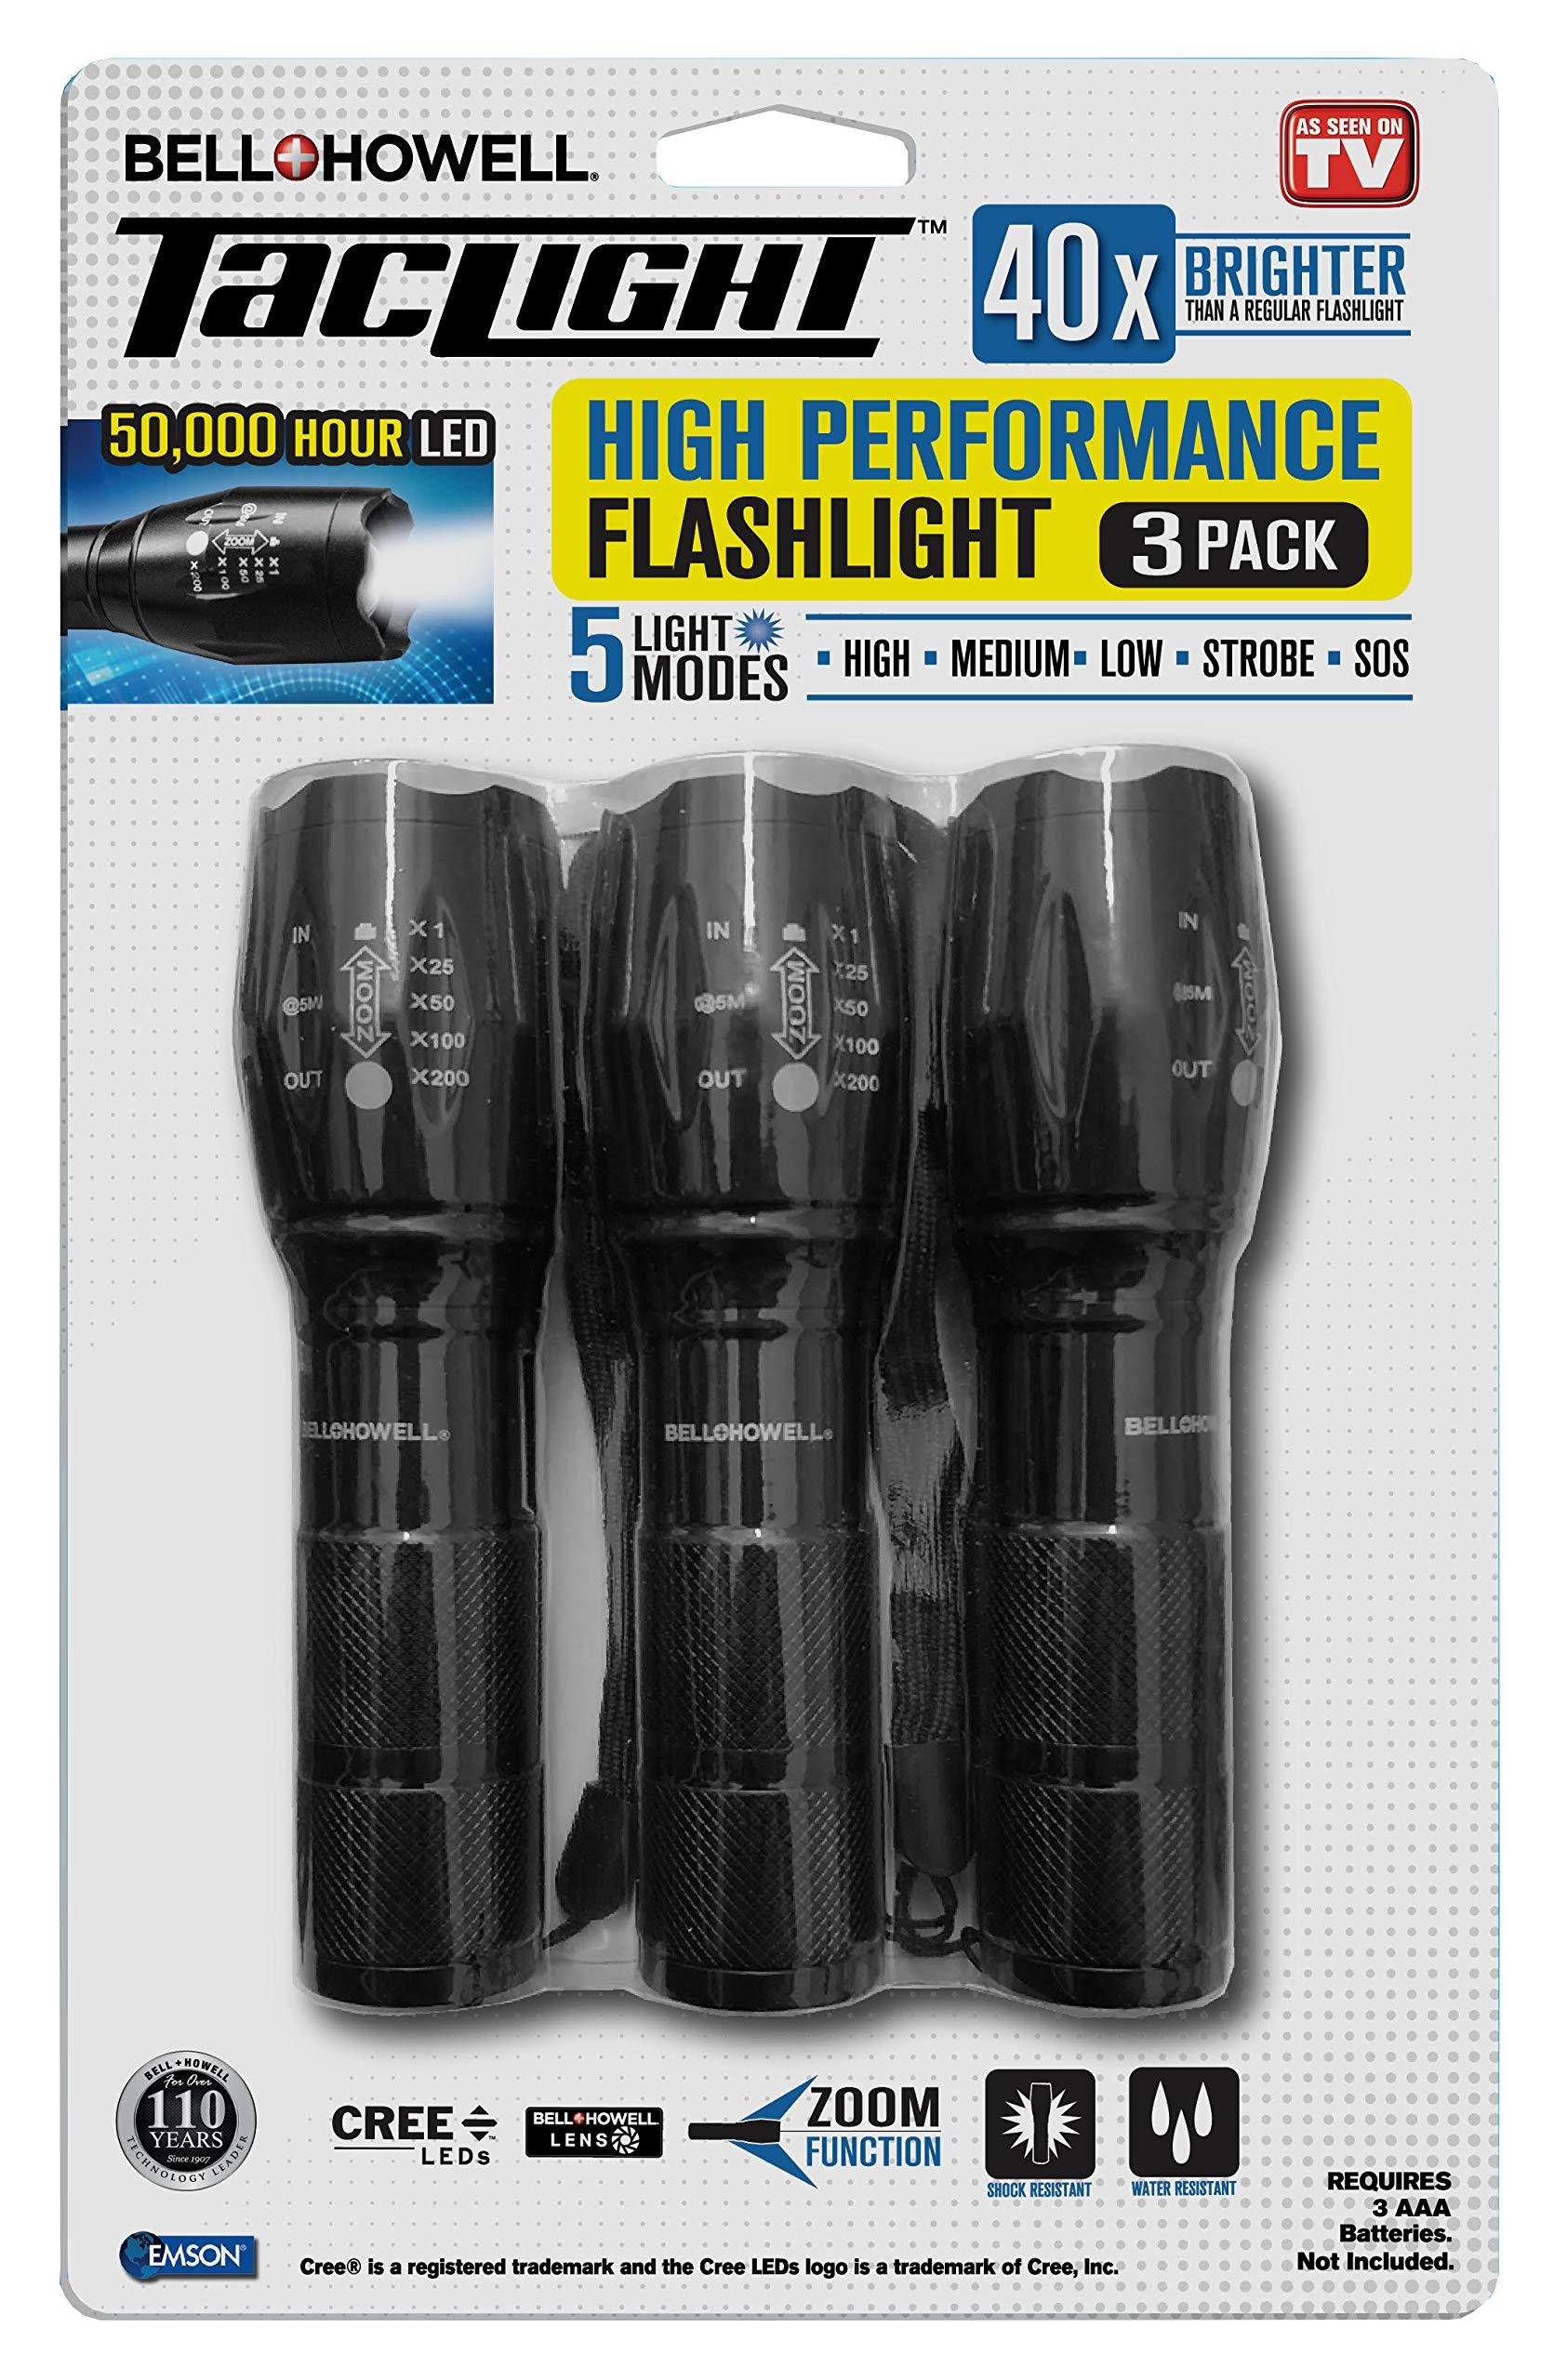 TACLIGHT FLASHLIGHT As Seen On TV Set of by Bell and Howell LED Tactical  Flash light Shock Water Resistant Military Grade Ultra Bright with Modes  and Zoom Function (40x Brighter)